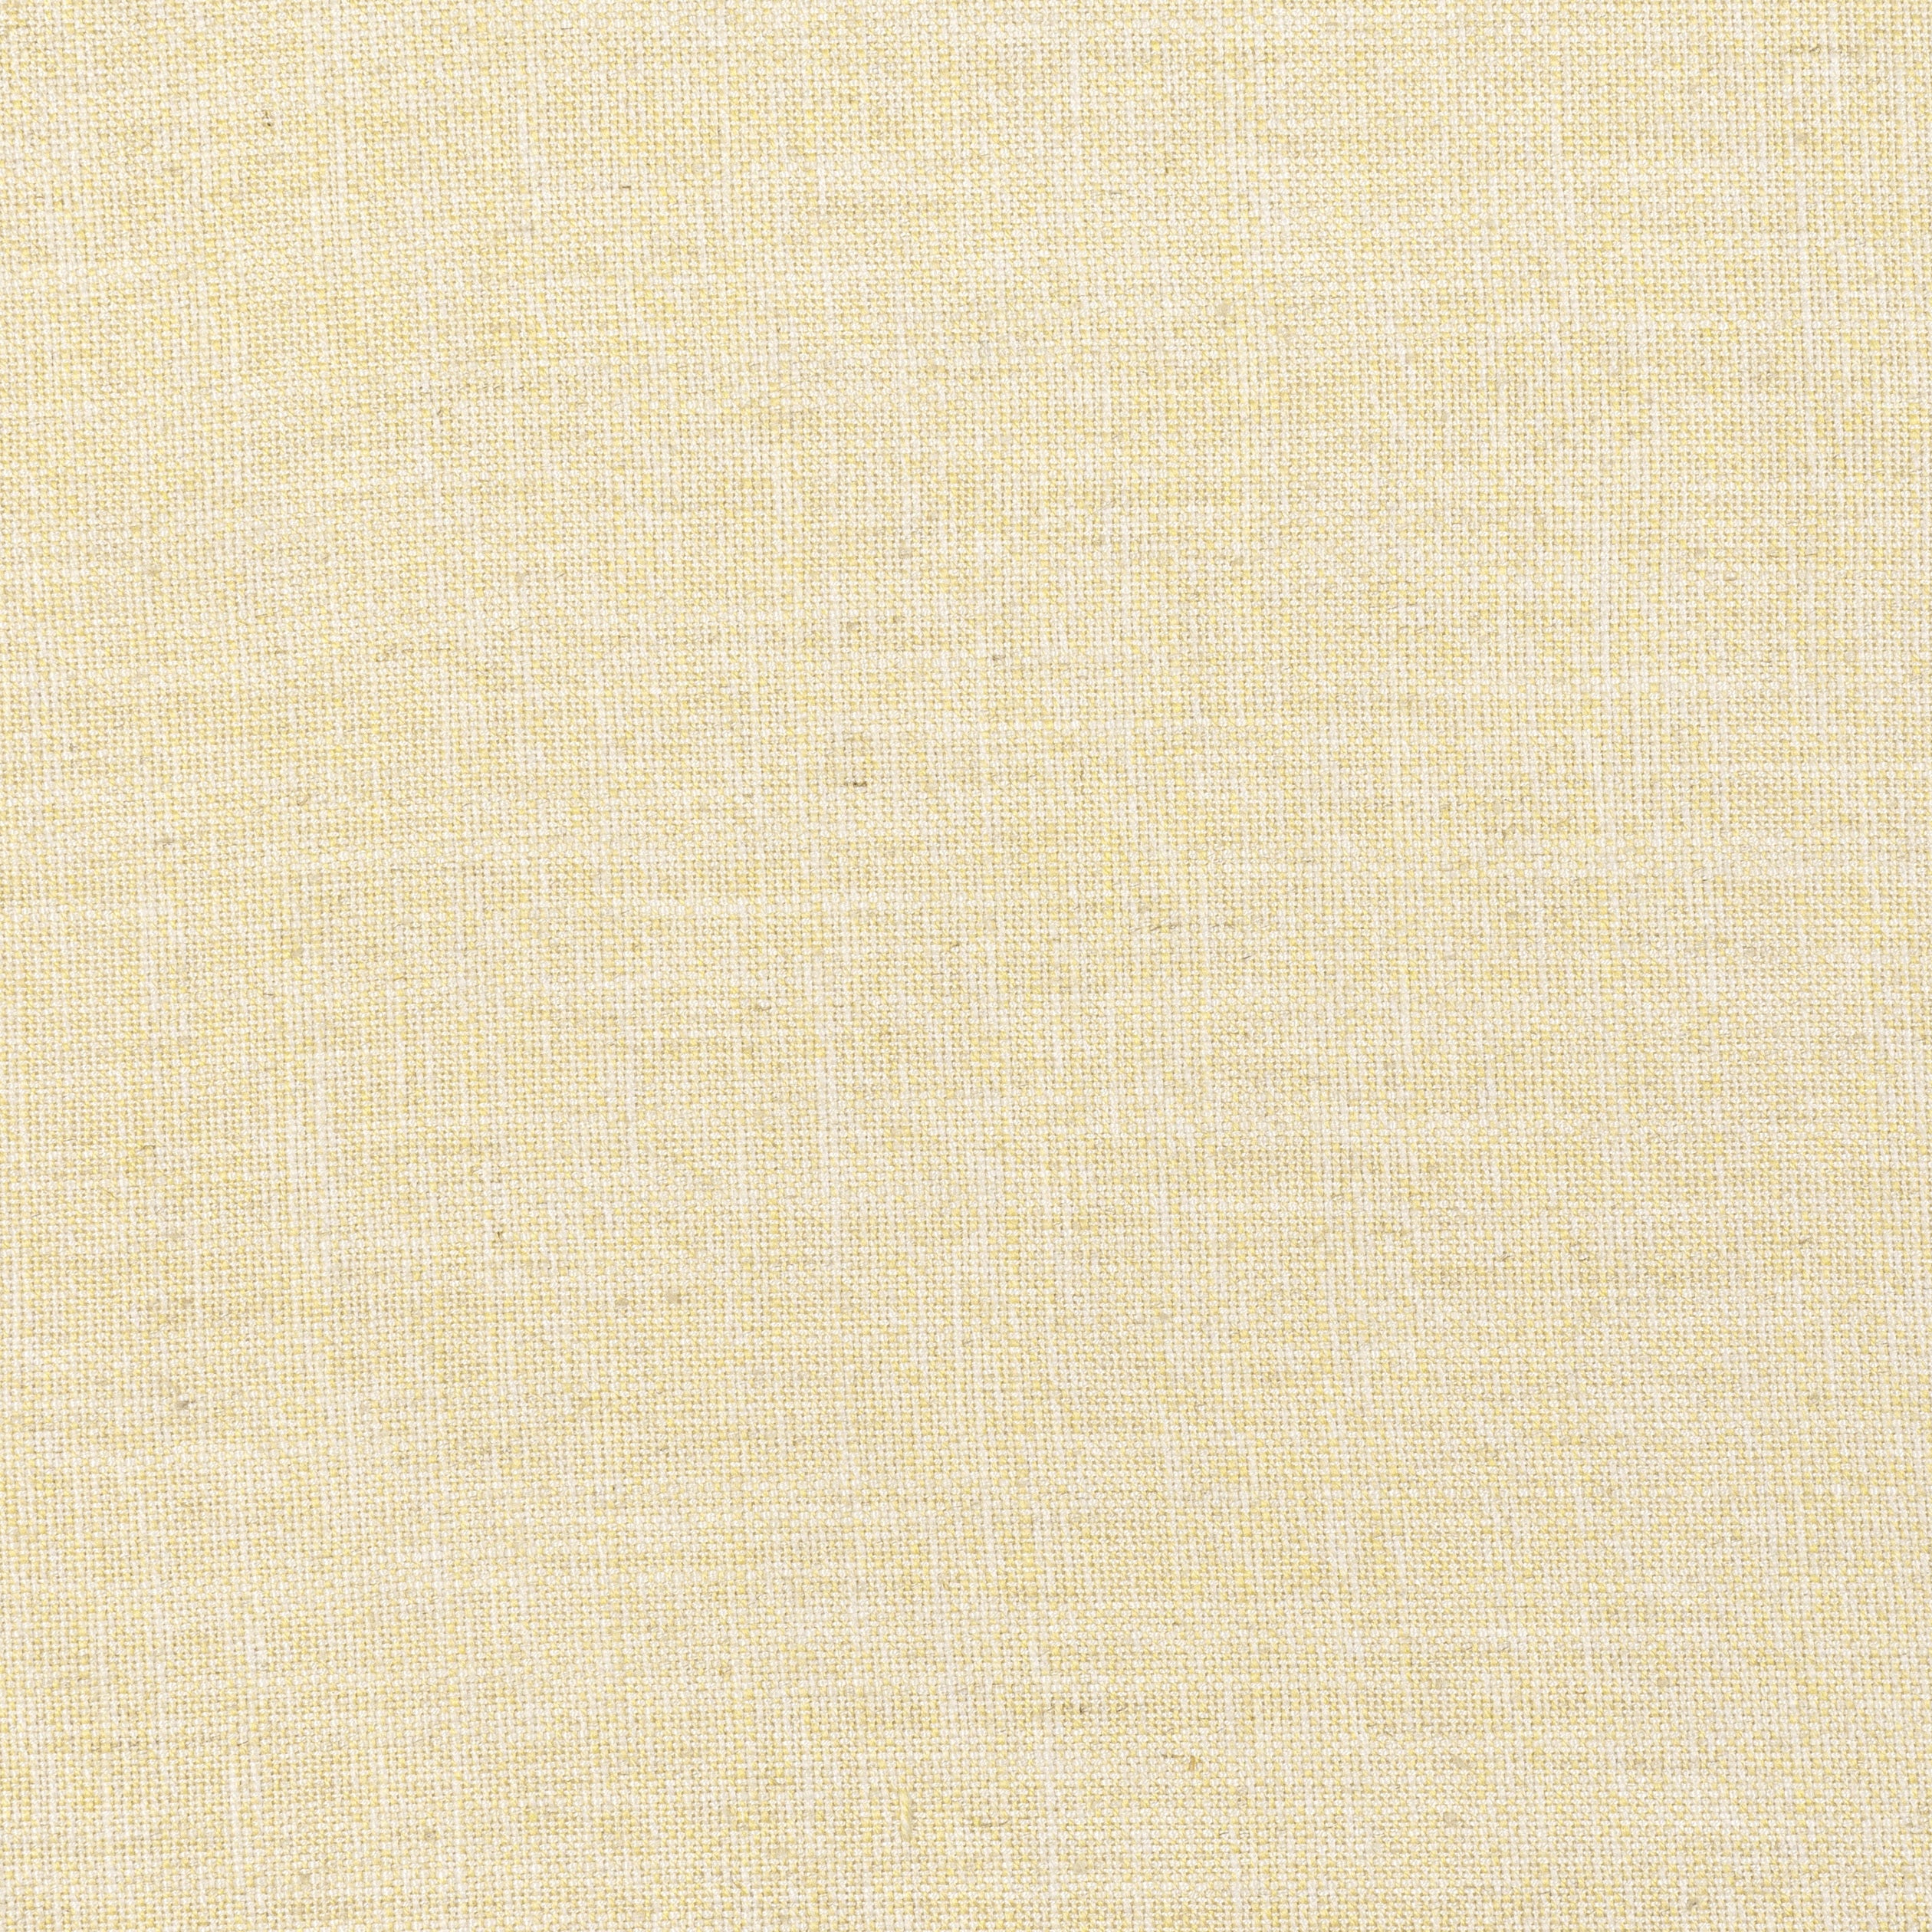 Terra Linen fabric in straw color - pattern number FWW7688 - by Thibaut in the Palisades collection